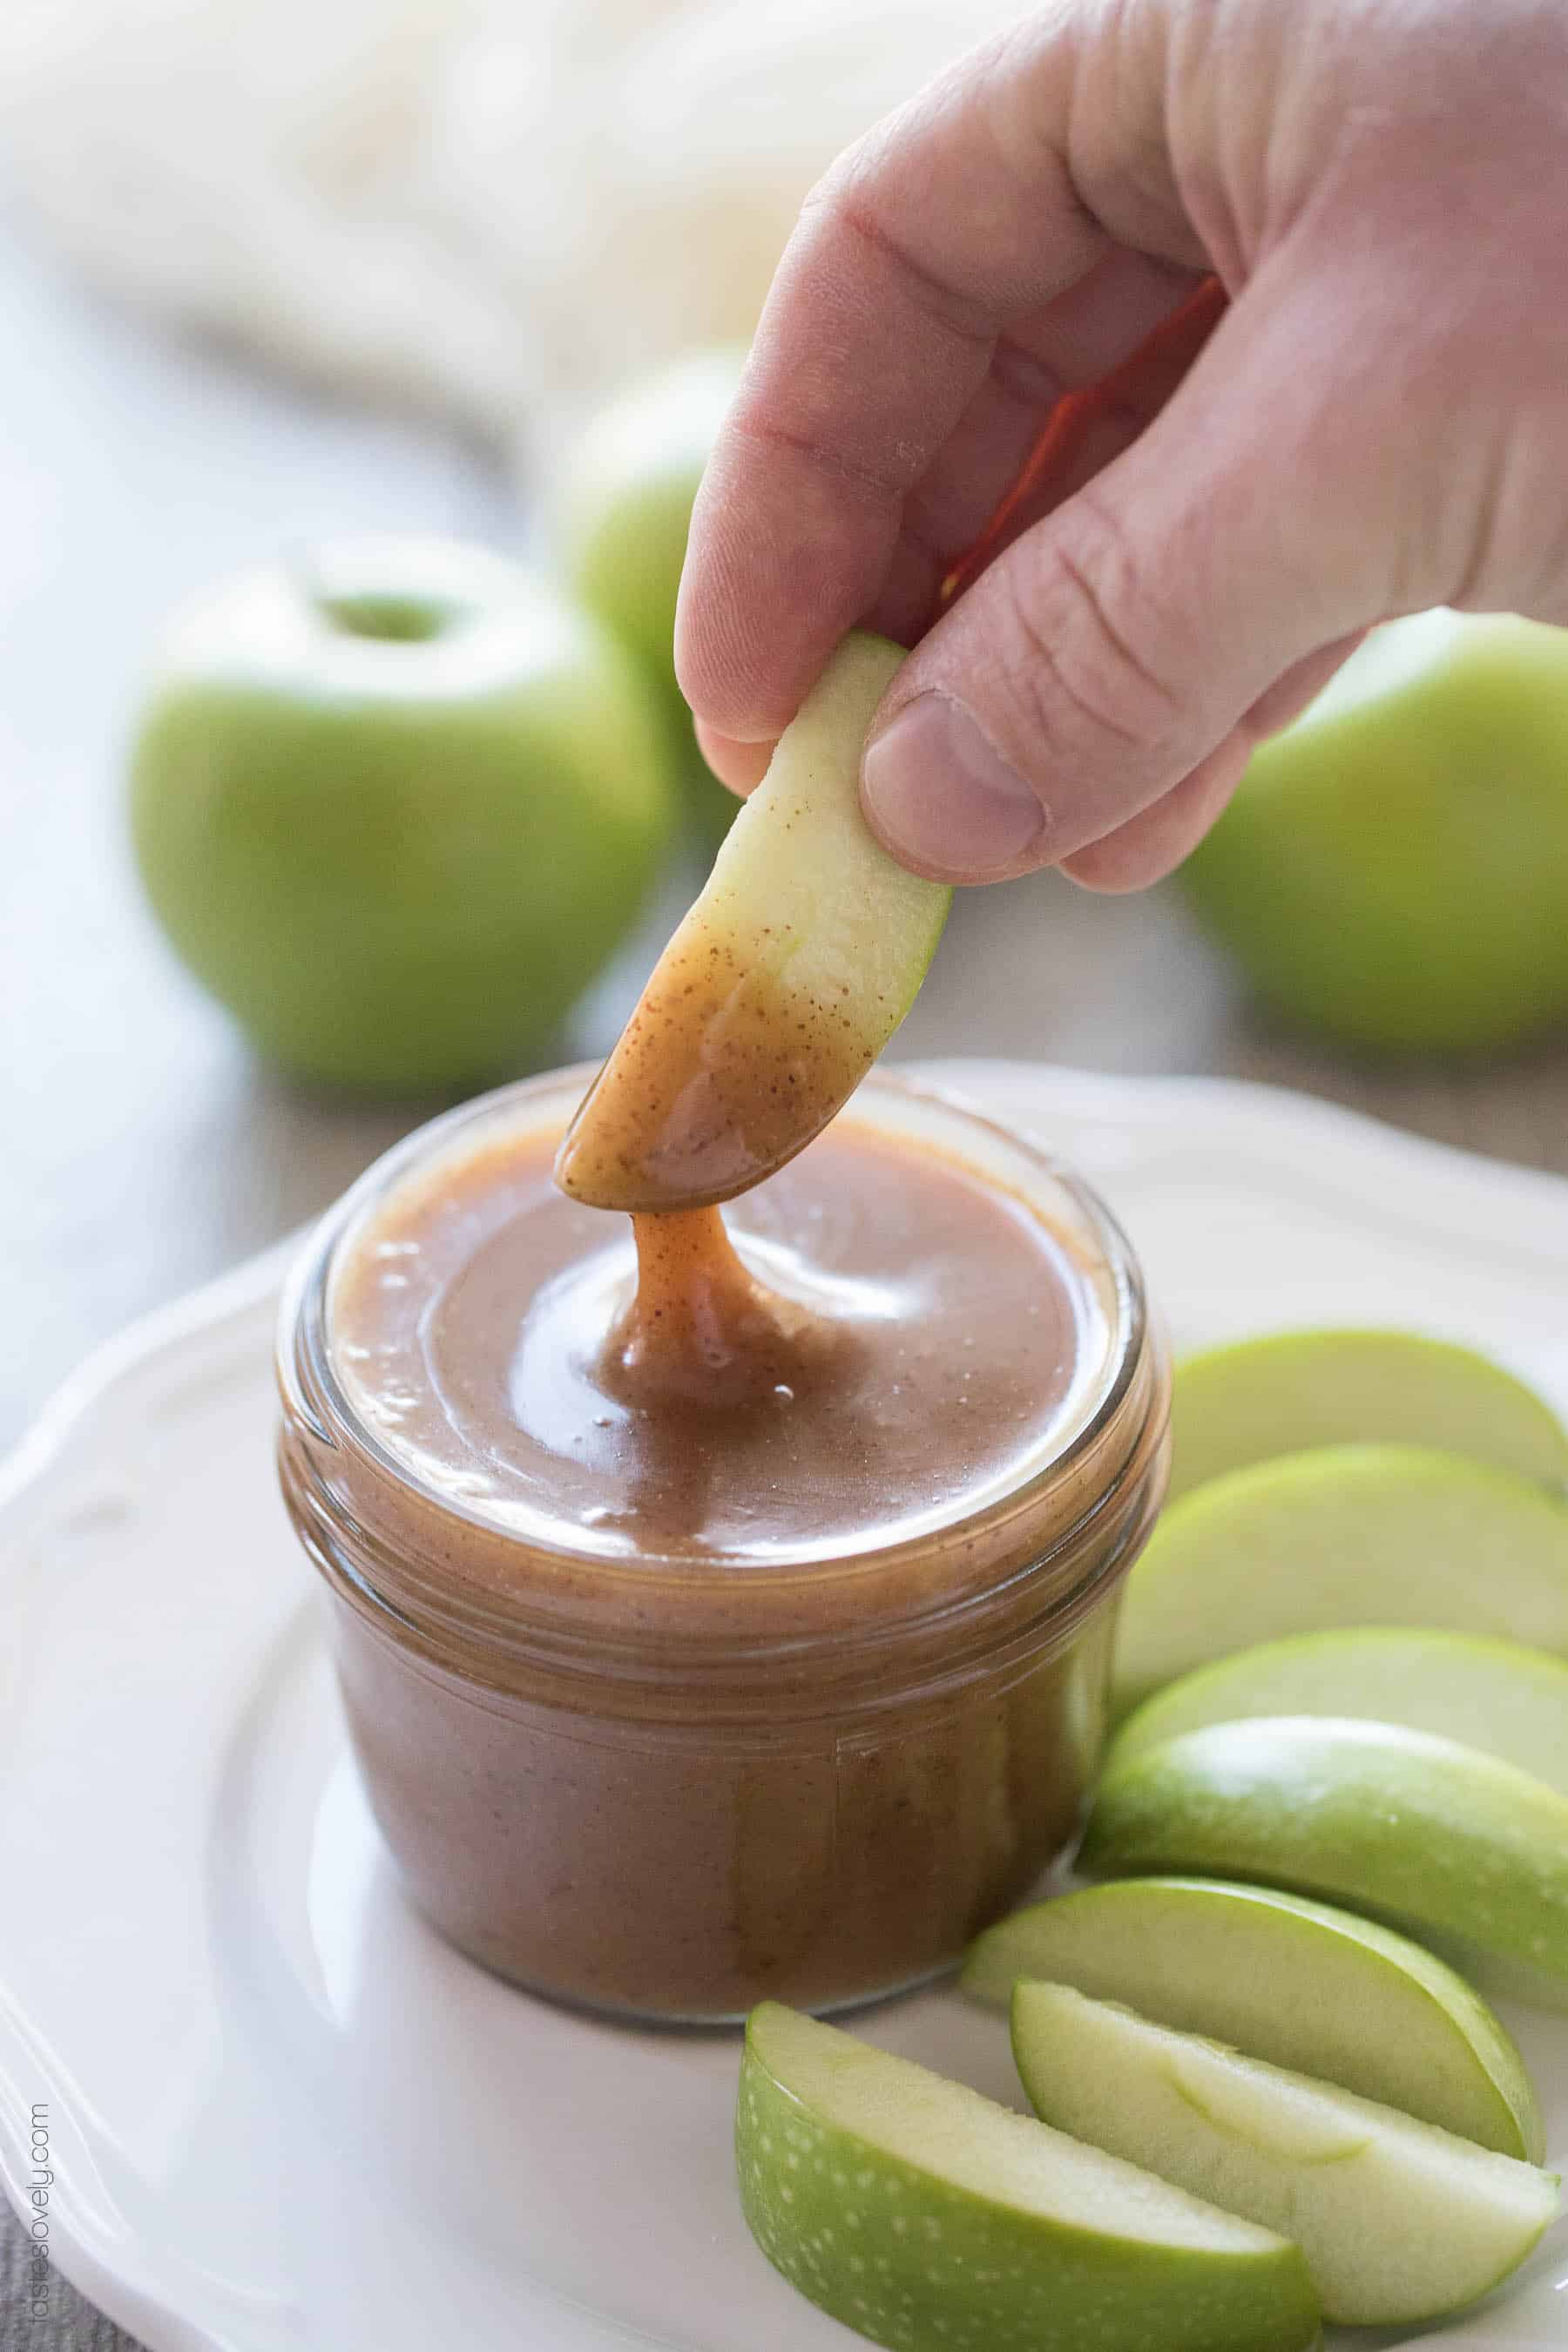 Paleo Salted Caramel Sauce - a 3 minute microwave caramel sauce that is paleo, dairy free, refined sugar free, gluten free and vegan!